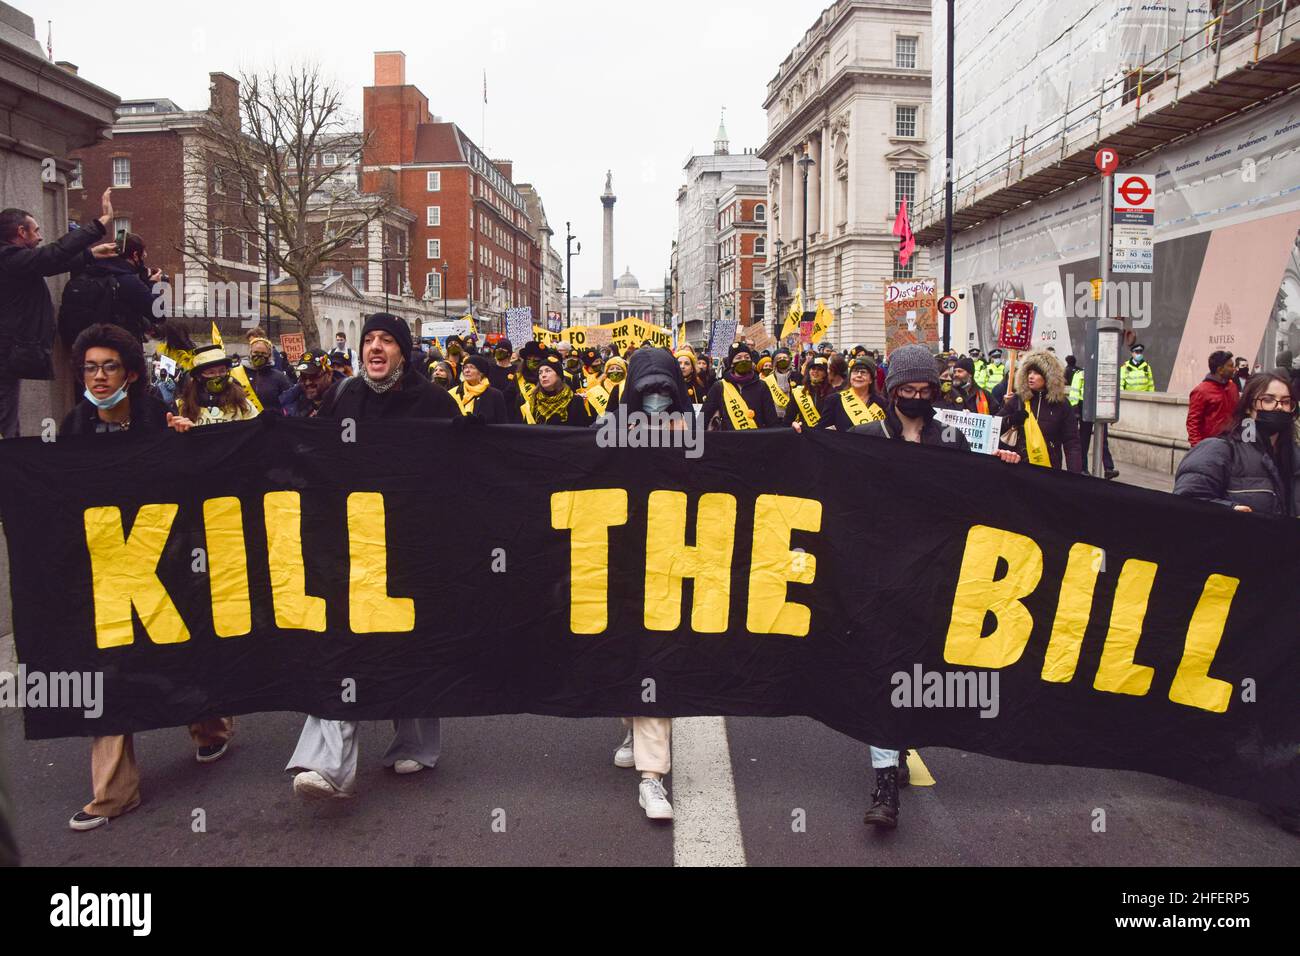 London, UK 15th January 2022. Protesters carry a 'Kill The Bill' banner in Whitehall. Thousands of people marched through central London in protest against the Police, Crime, Sentencing and Courts Bill, which will make many types of protest illegal. Stock Photo